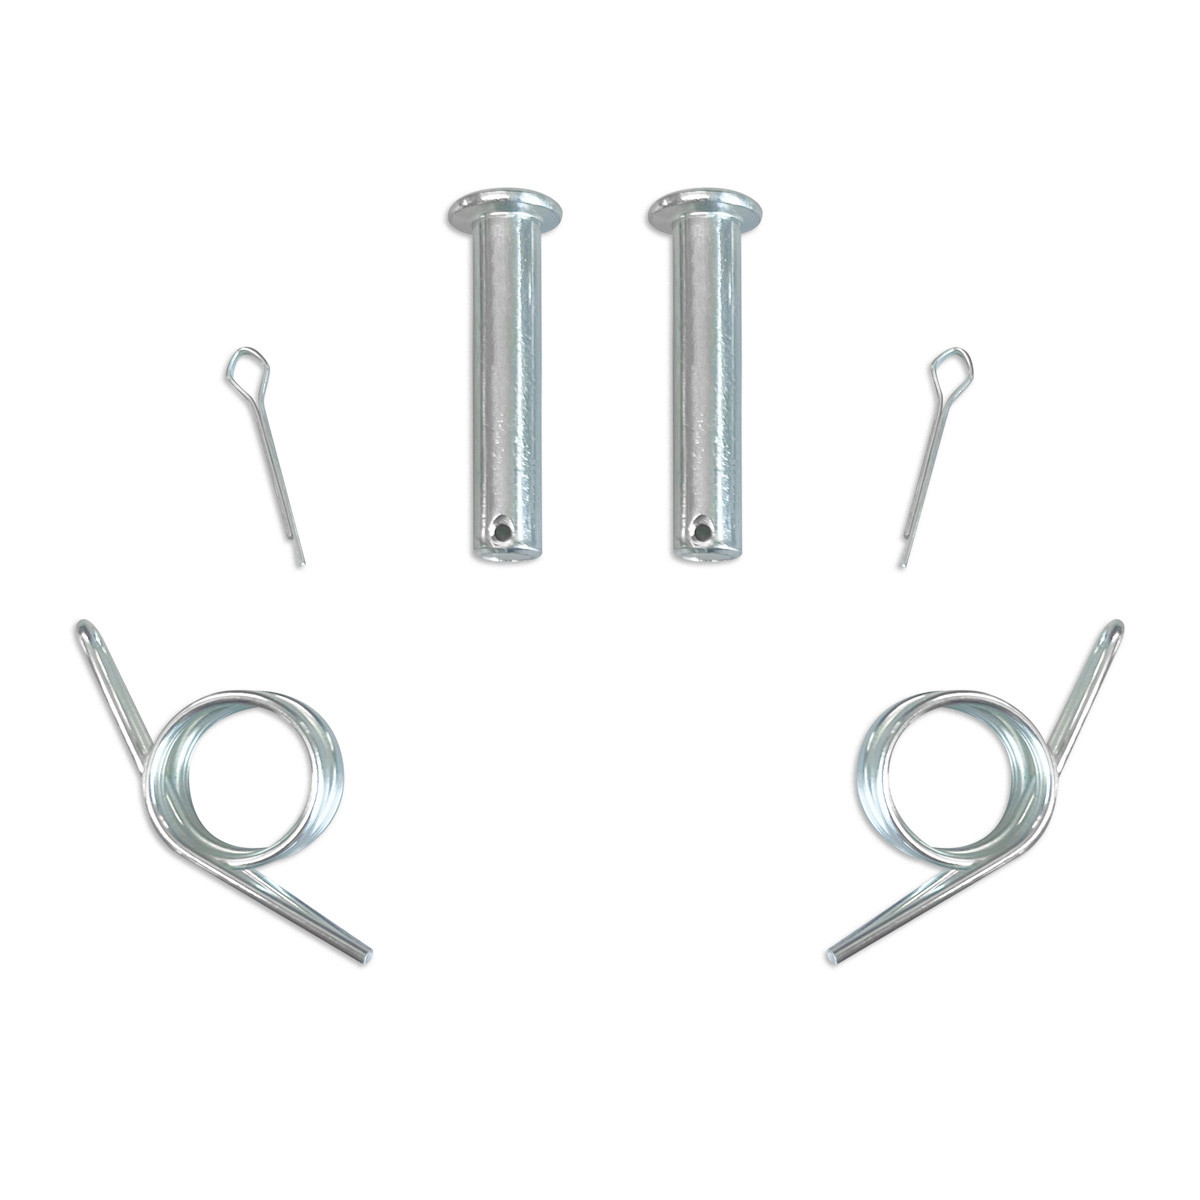 FOOT PEGS REPLACEMENT KIT